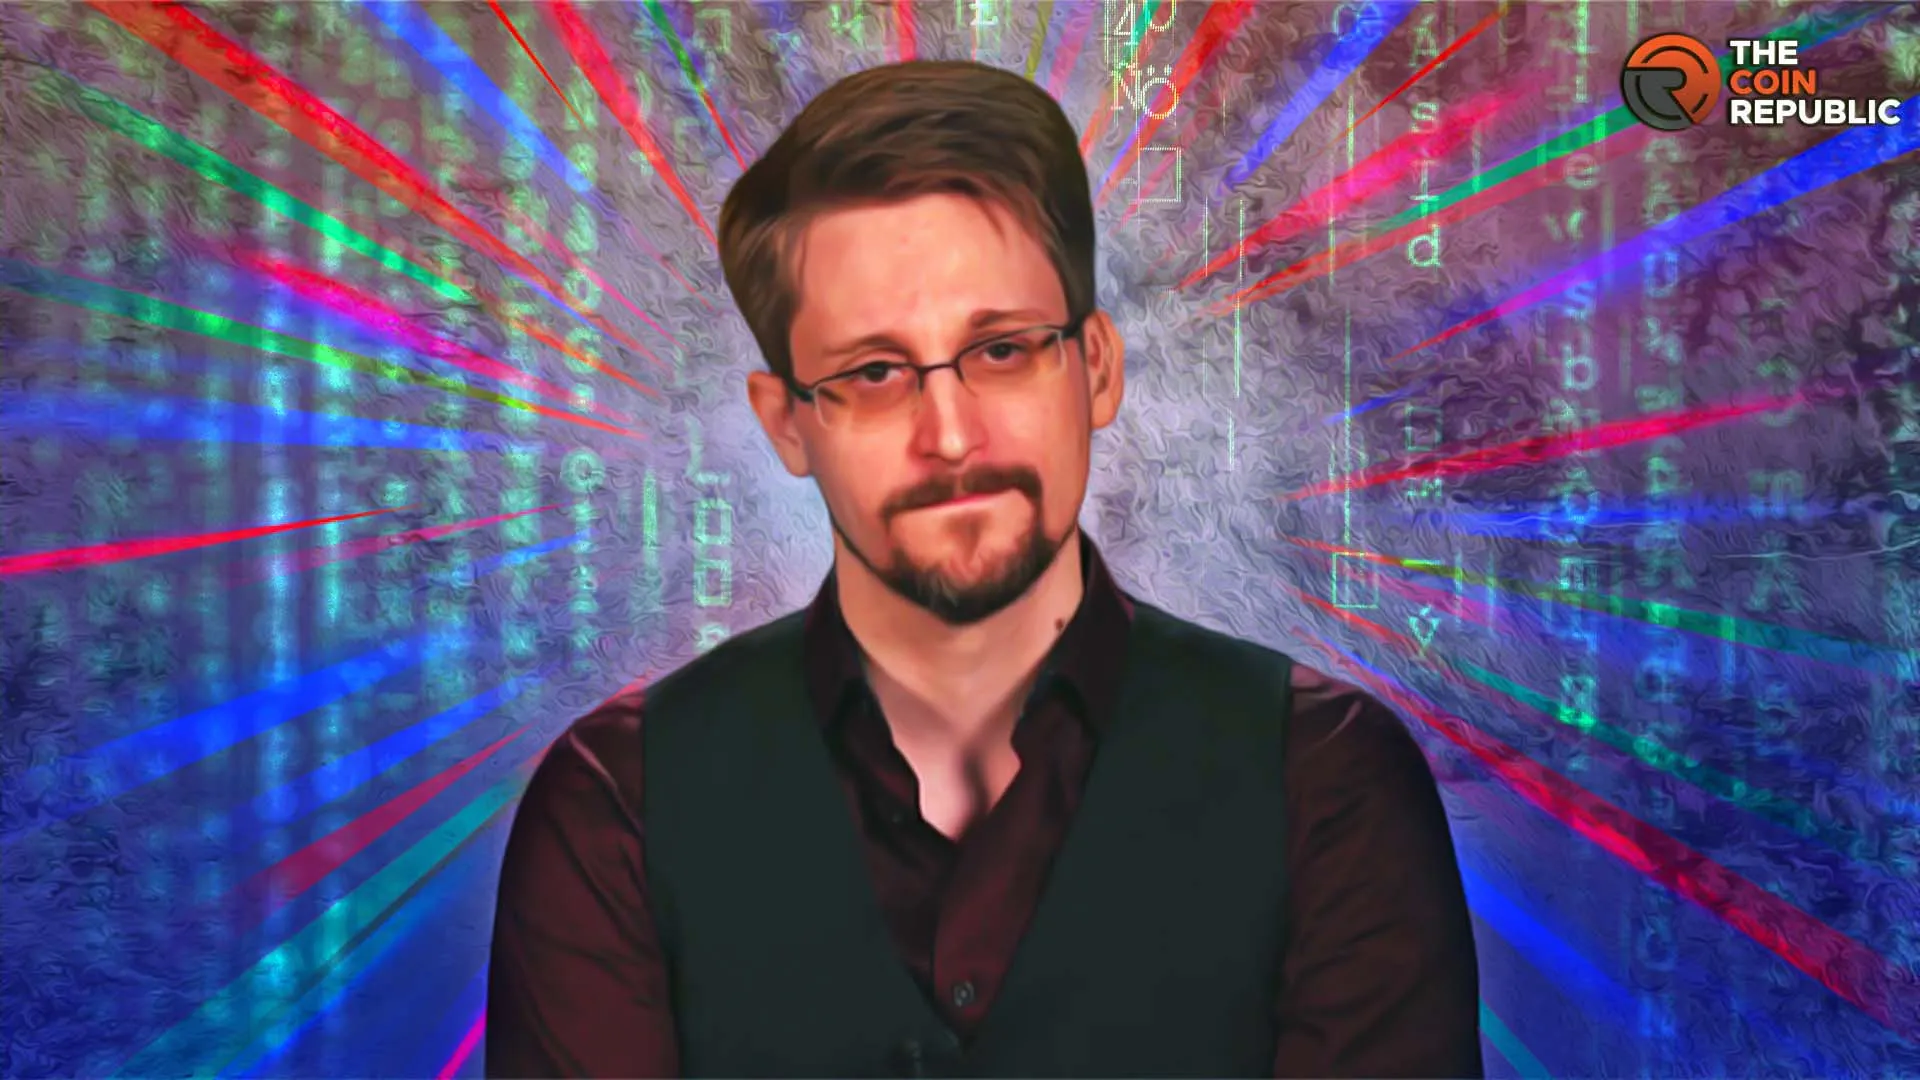 Edward Snowden Revealed NSA Documents a Decade Ago; What’s His Take on Crypto?